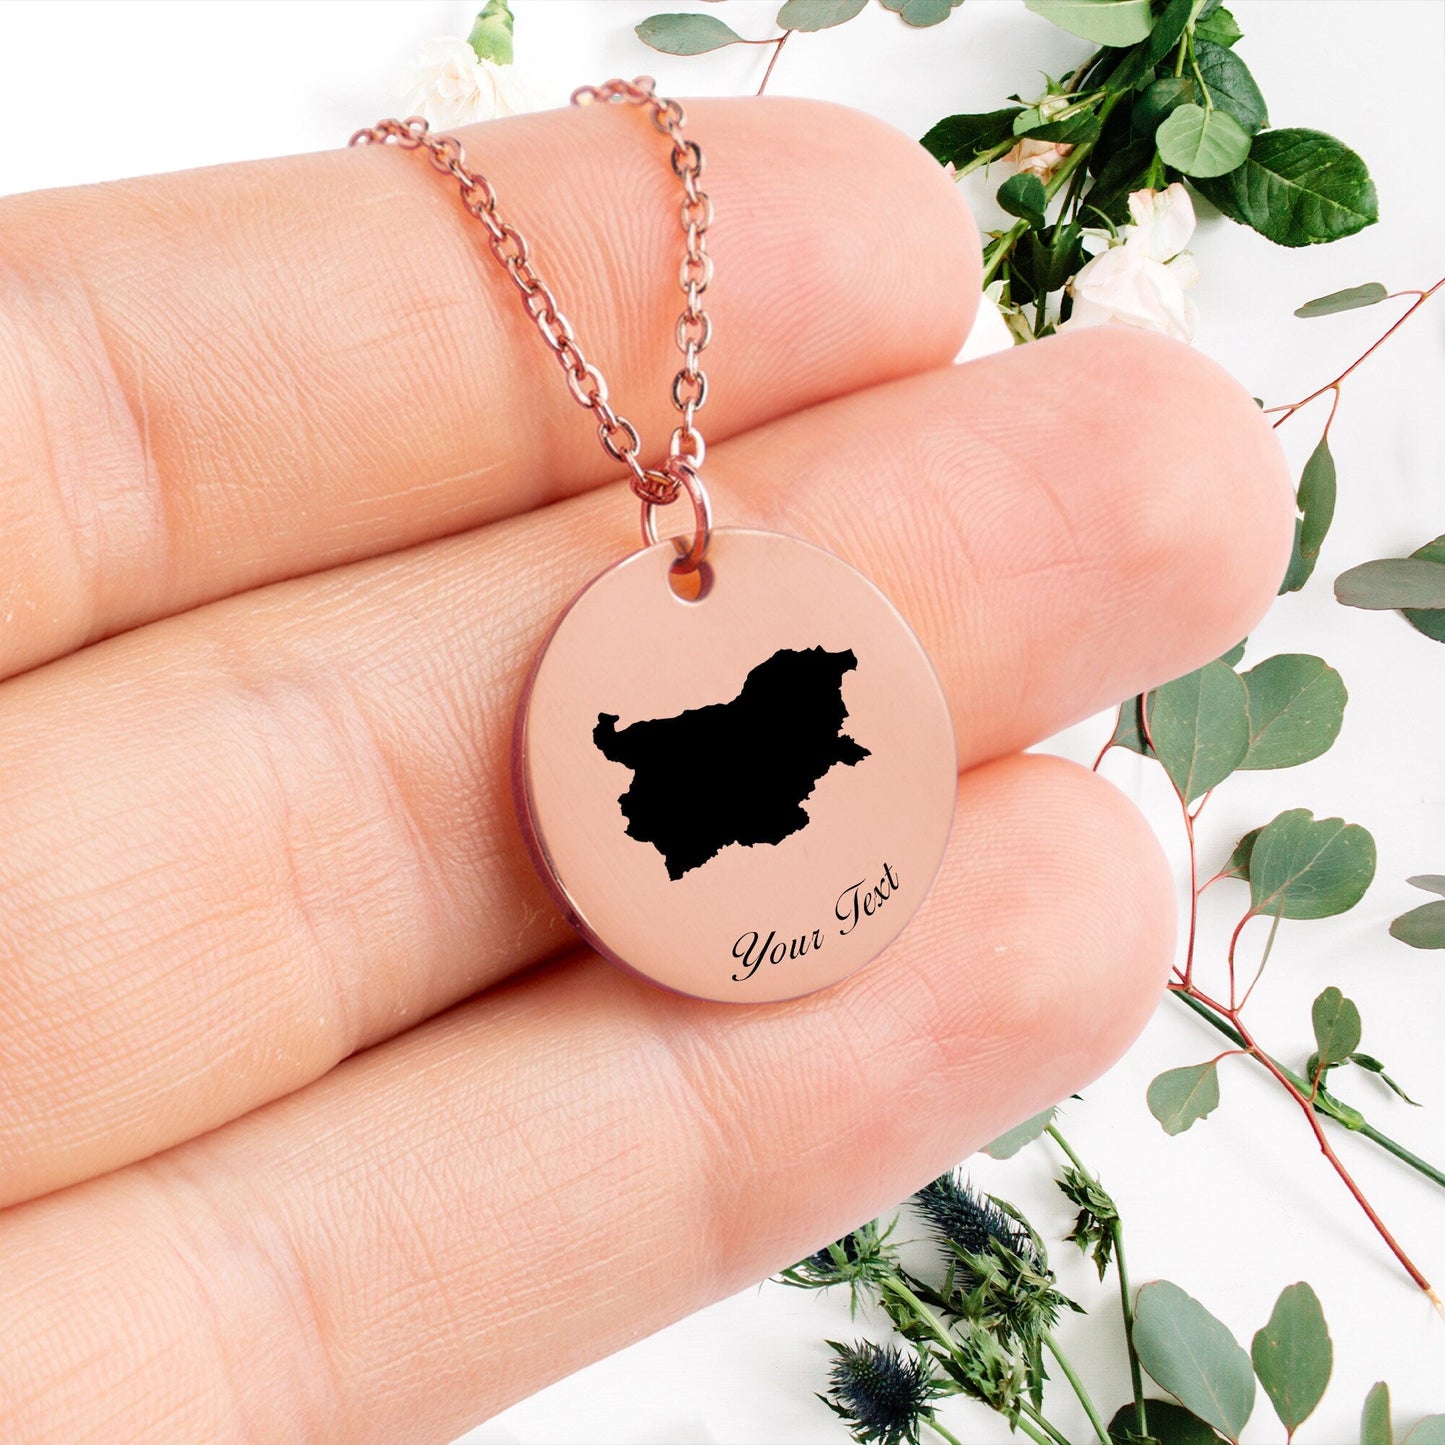 Bulgaria Country Map Necklace, Your Name Necklace, Minimalist Necklace, Personalized Gift, Silver Necklace, Gift For Him Her